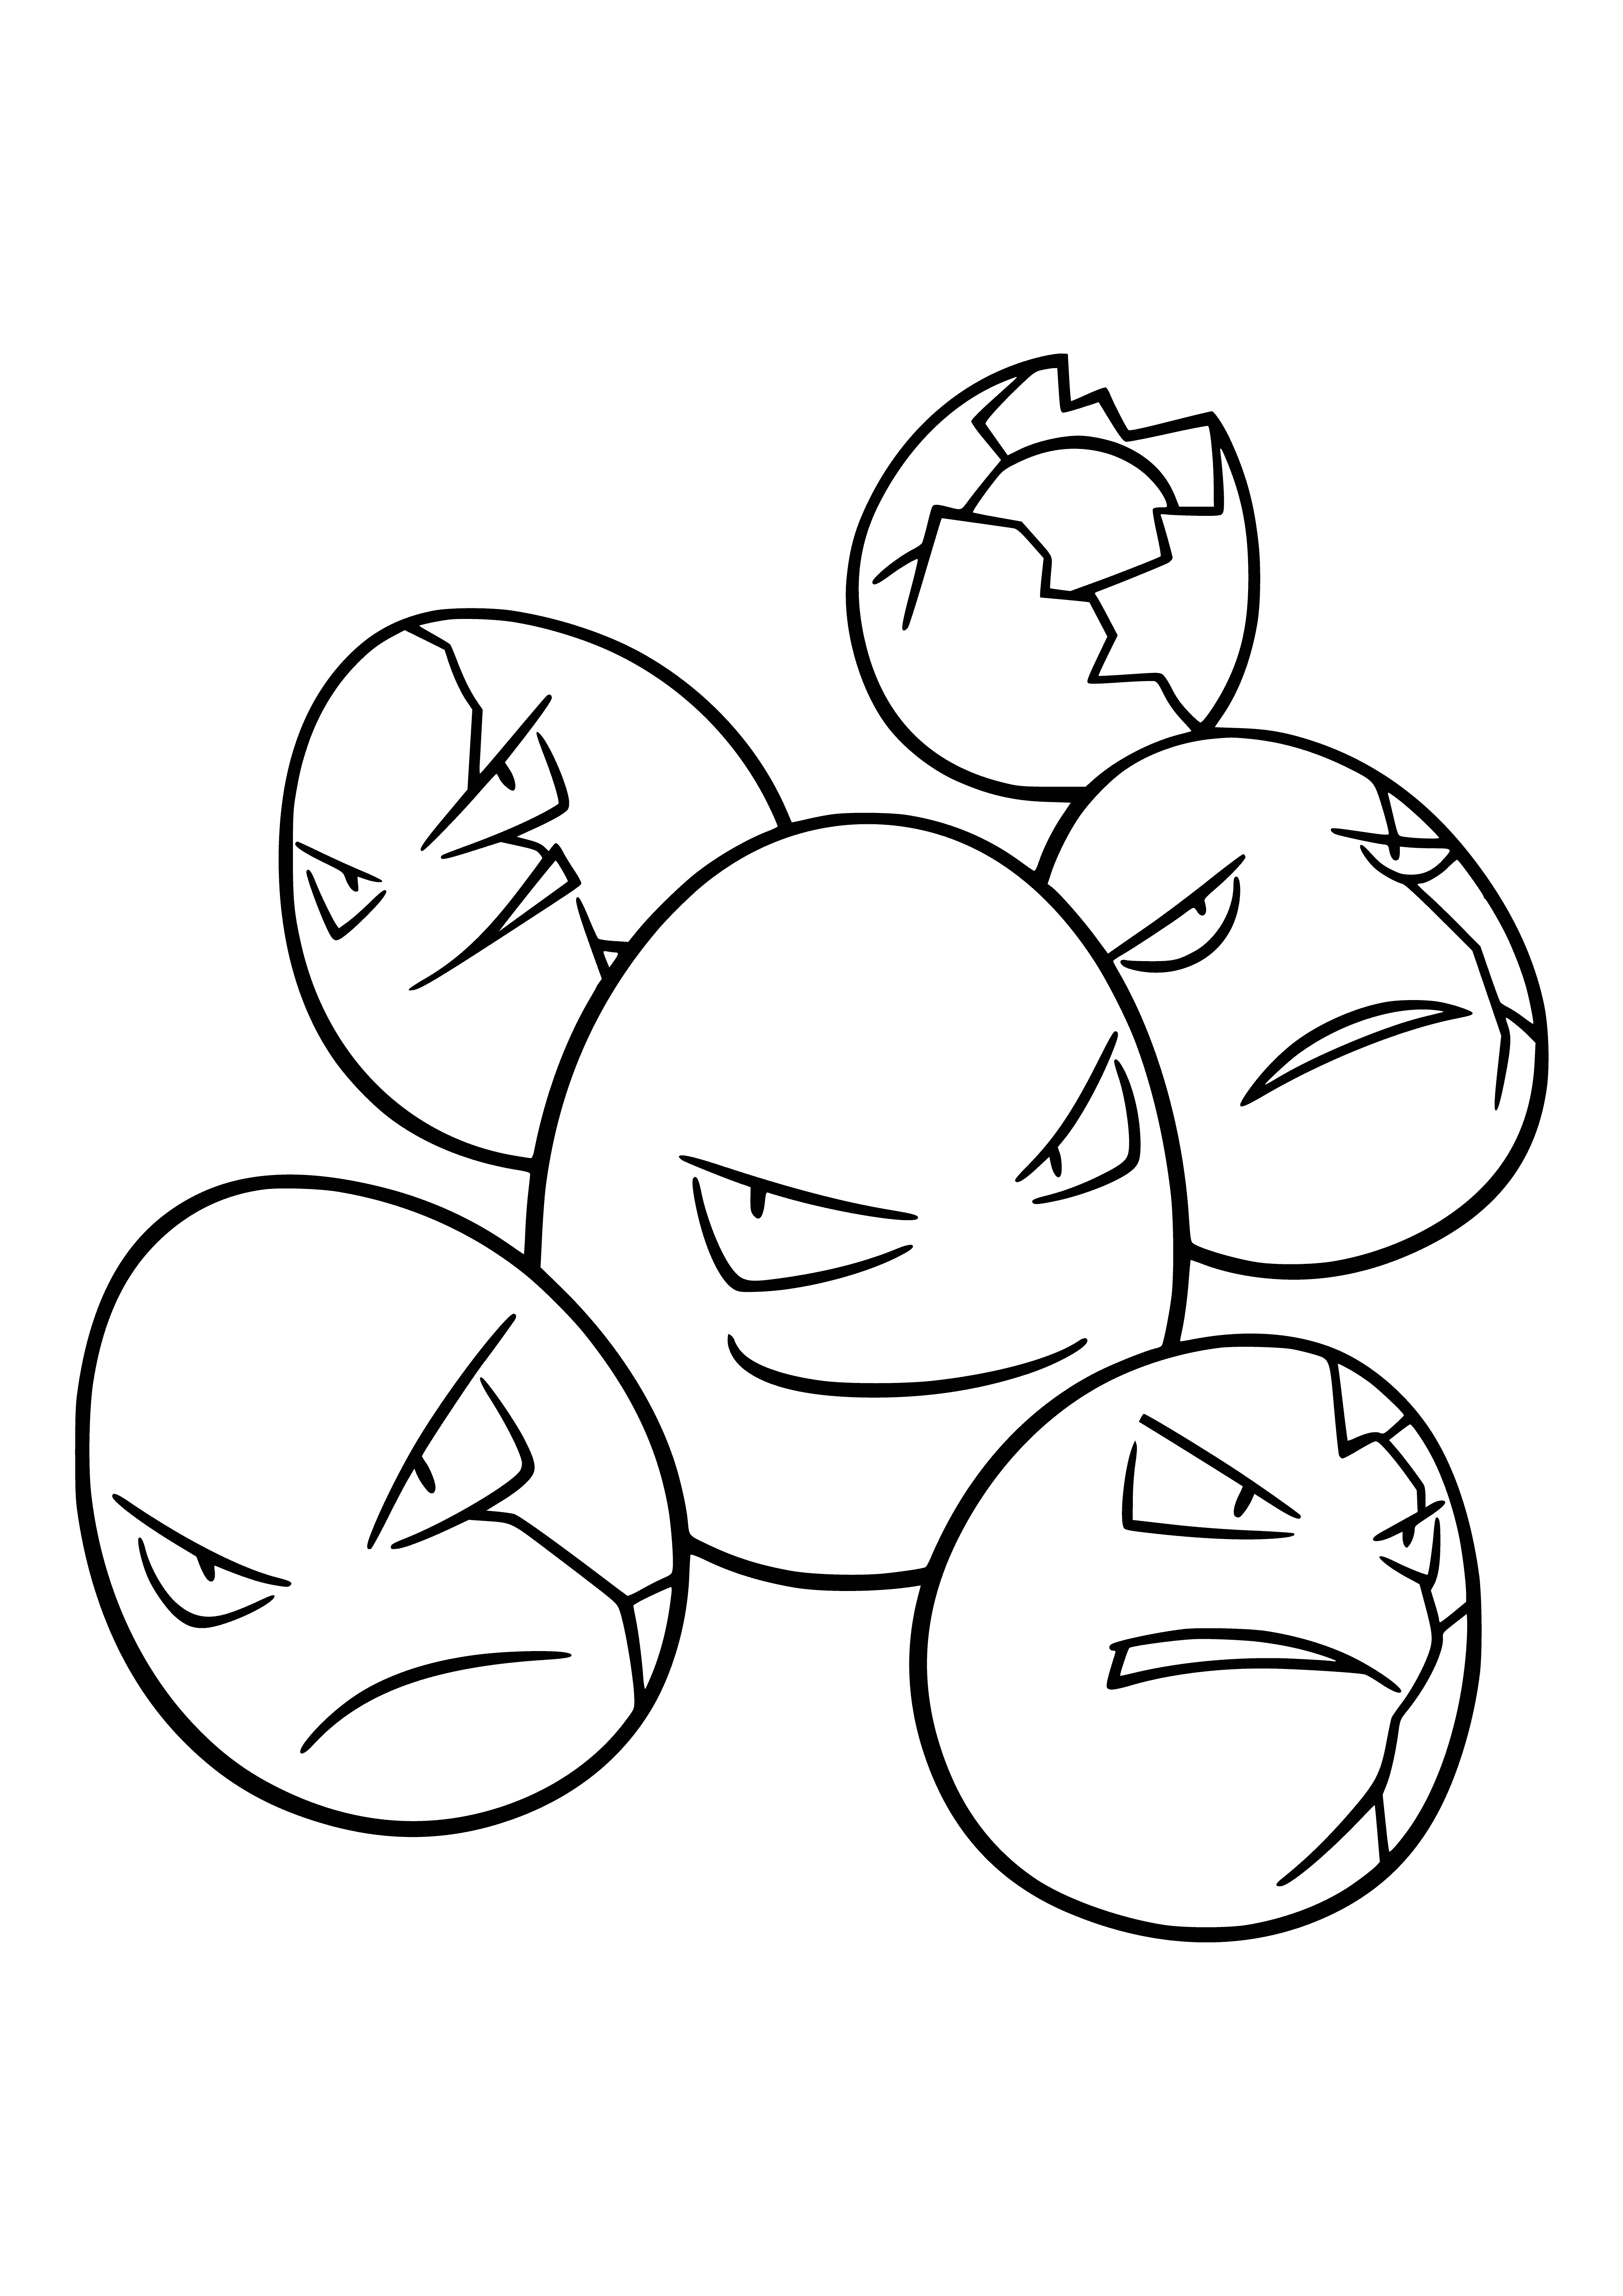 Pokemon Exeggcute coloring page